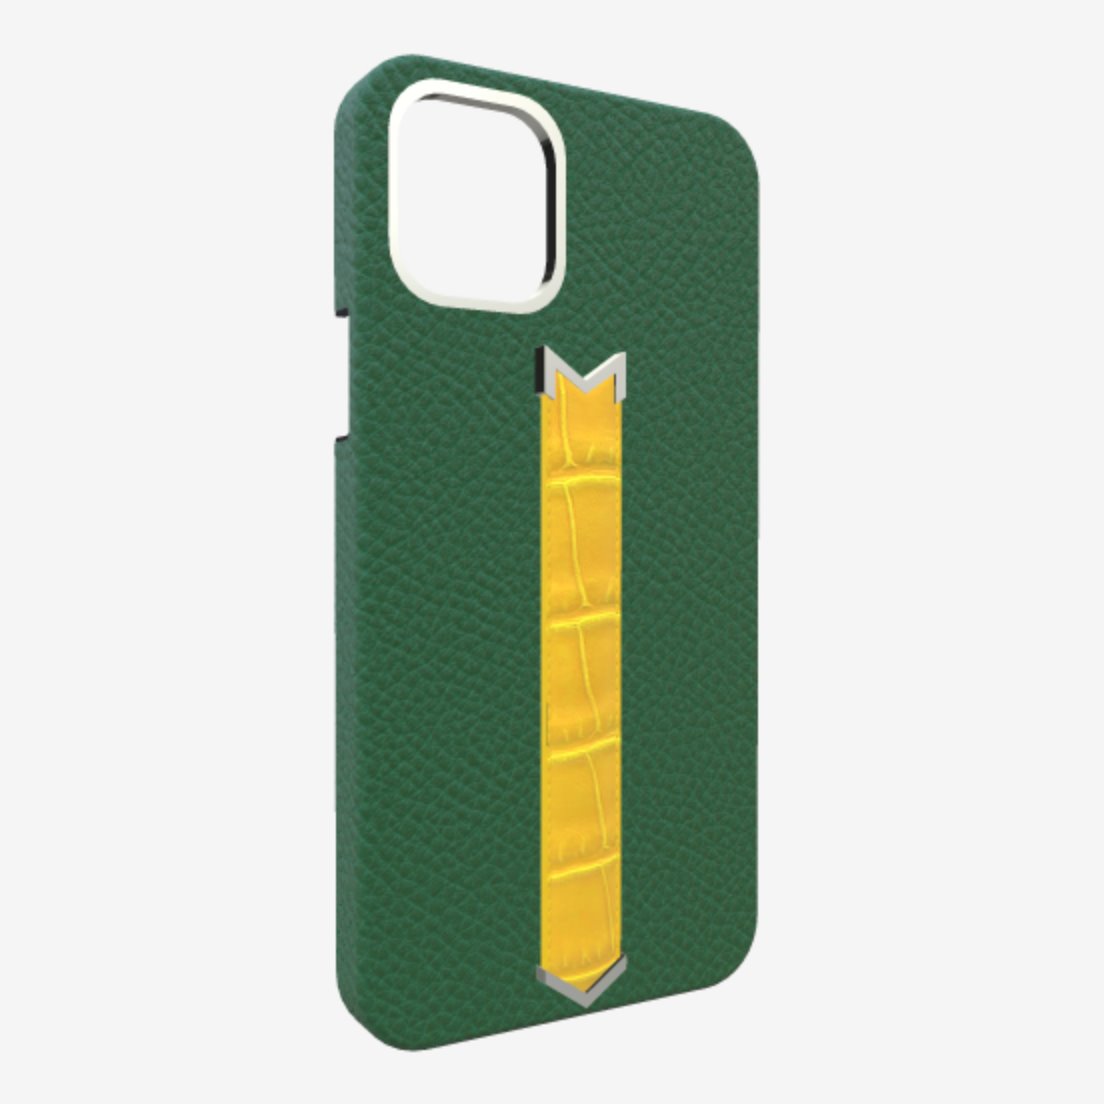 Silver Finger Strap Case for iPhone 13 Pro Max in Genuine Calfskin and Alligator Emerald-Green Summer-Yellow 